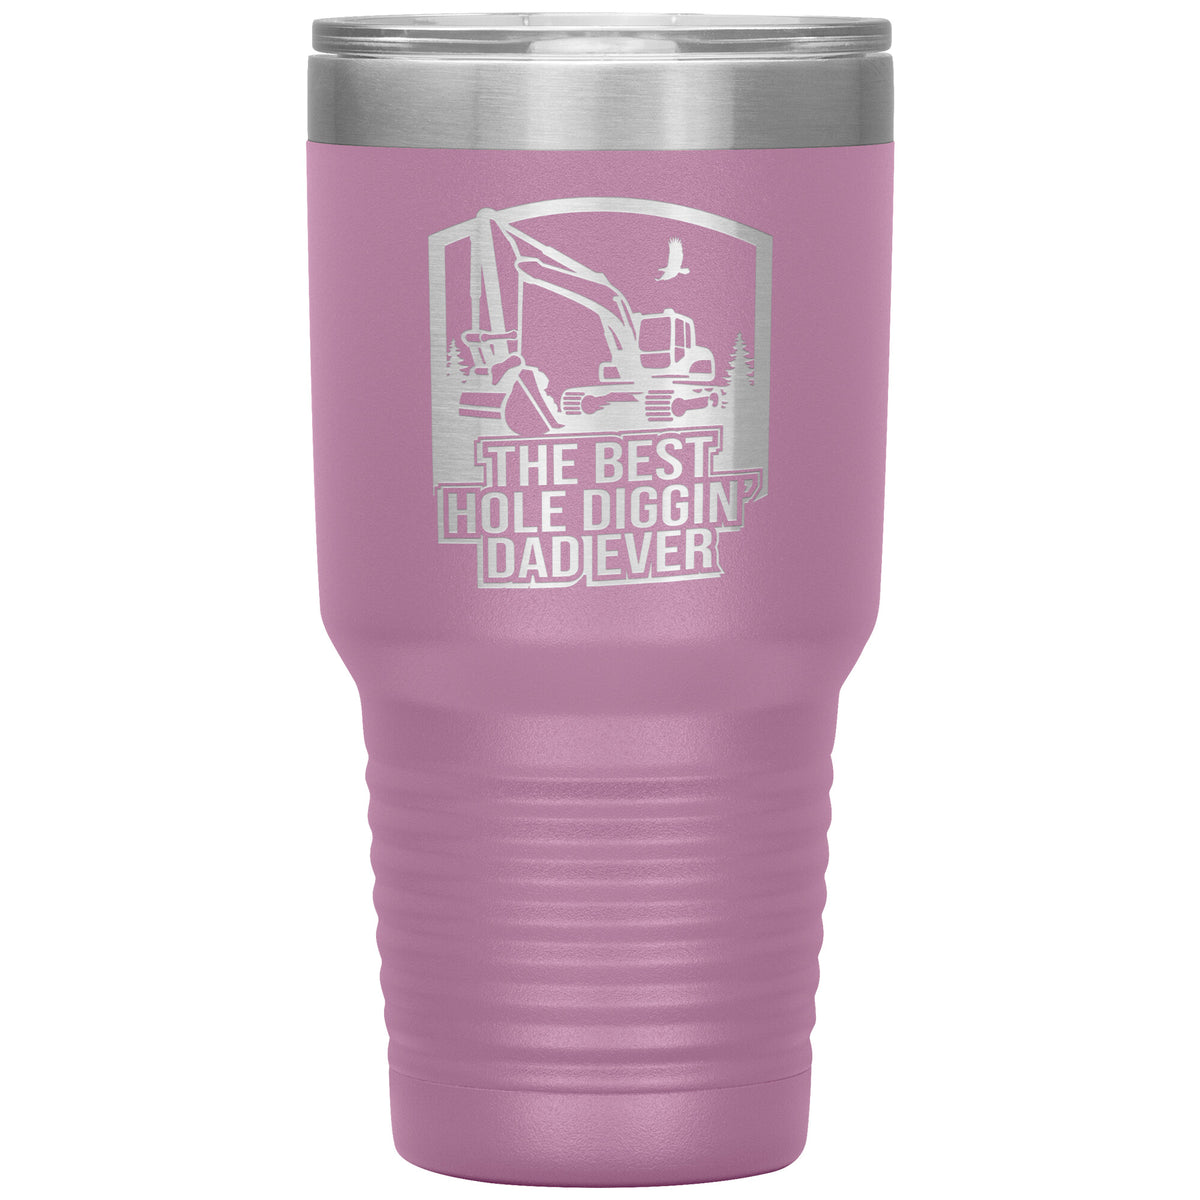 The Best Hole Diggin' Dad Ever - Excavator - 30oz Tumbler - Free Shipping